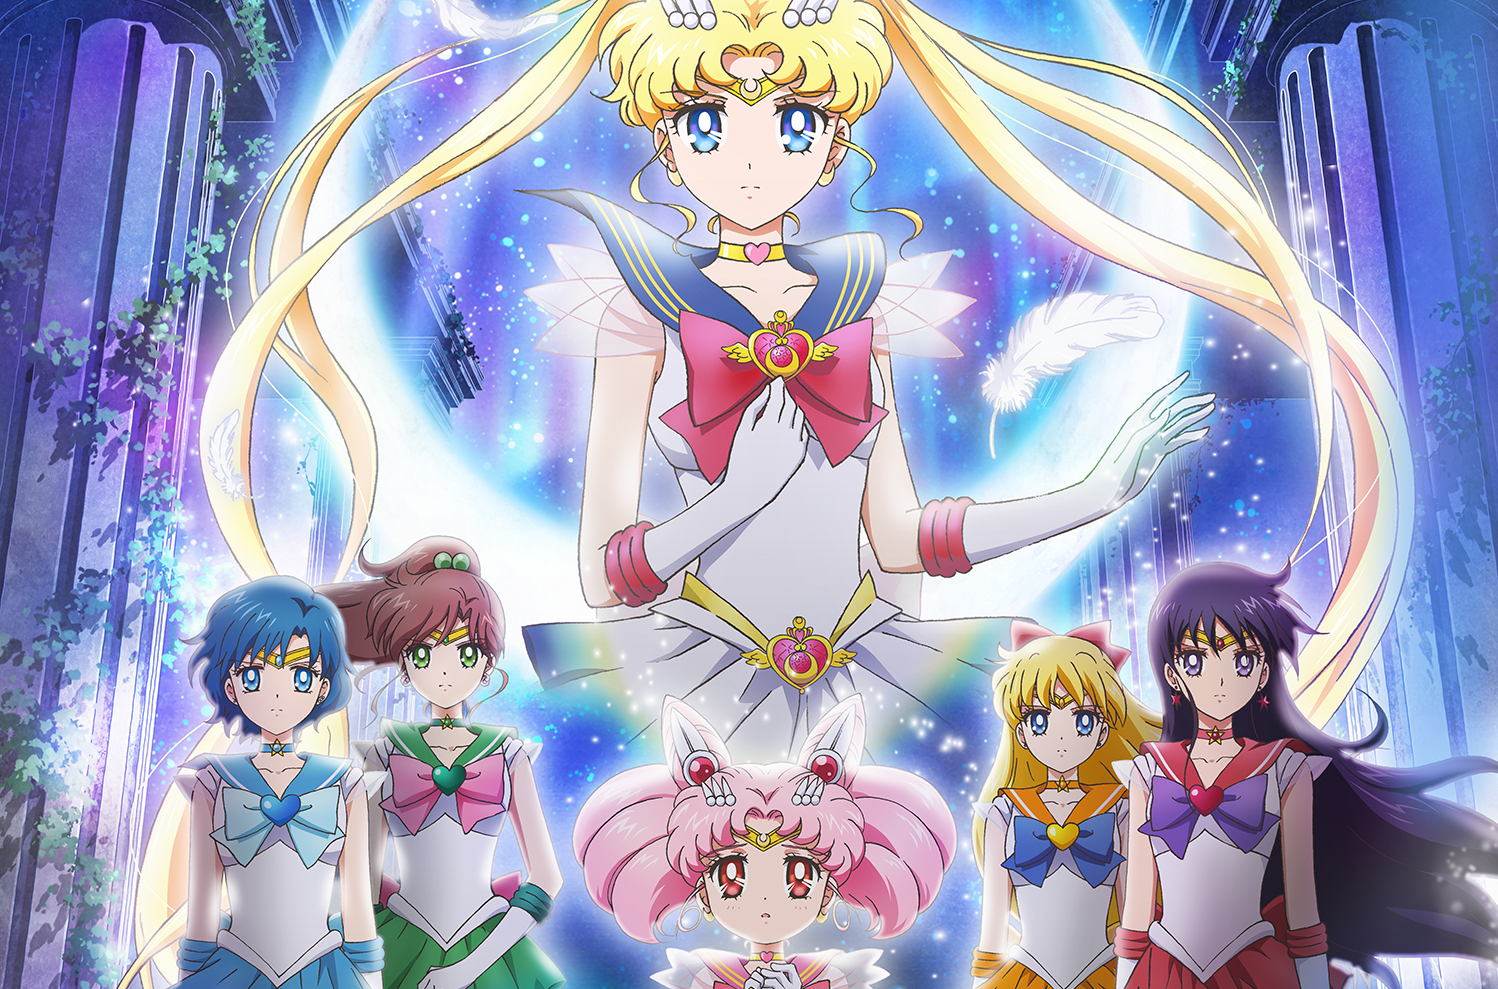 Sailor Moon Eternal Brings Long-Time Fans' Dreams to Life on